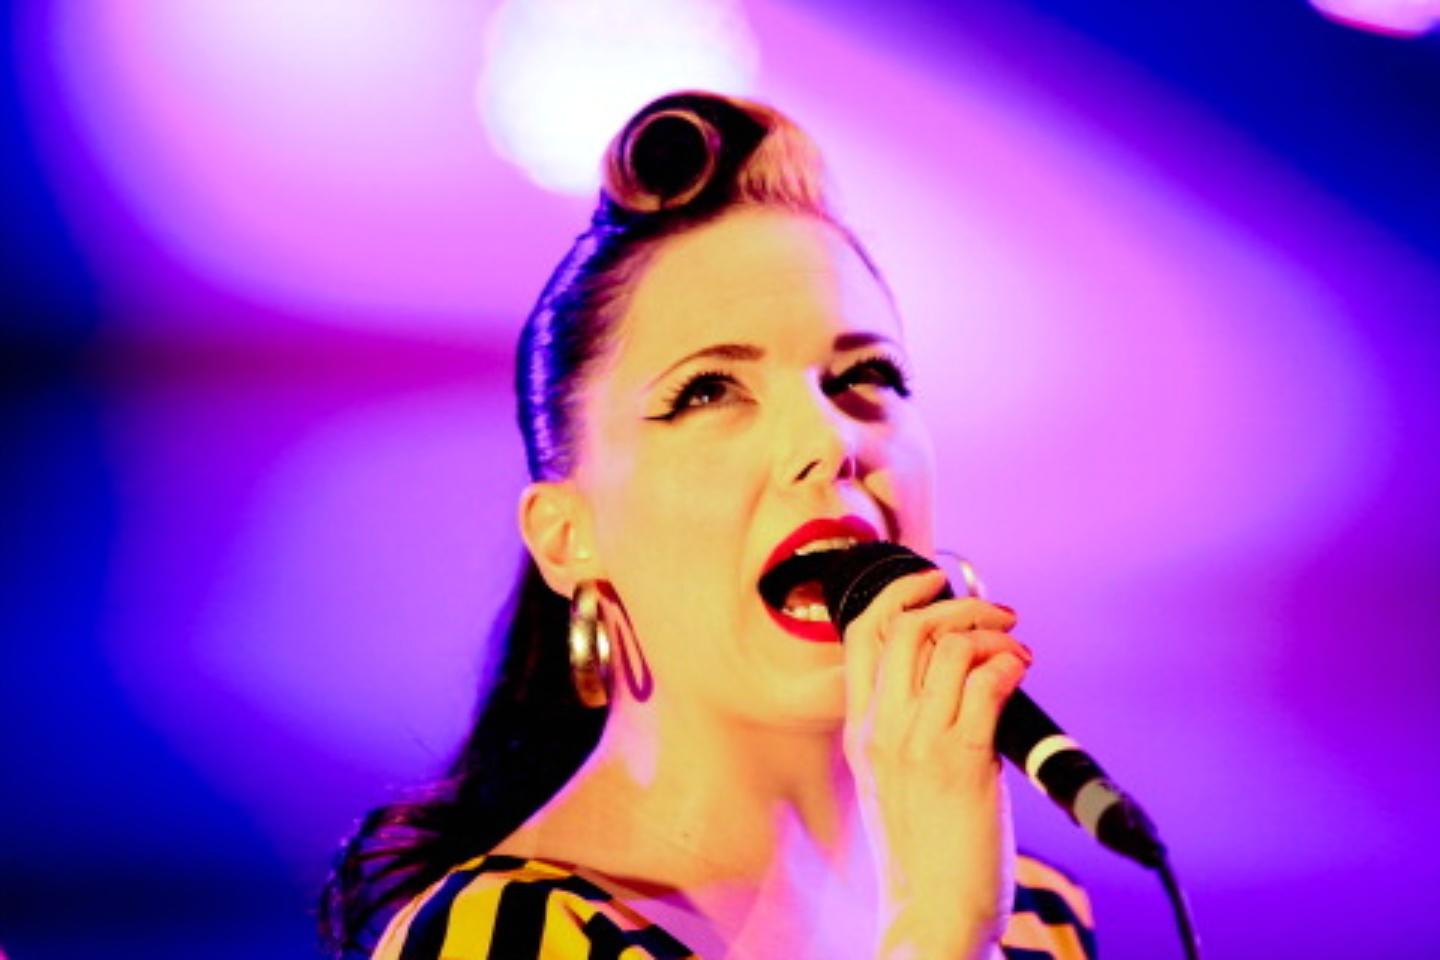 Imelda May Tickets Imelda May Tour Dates 2022 and Concert Tickets